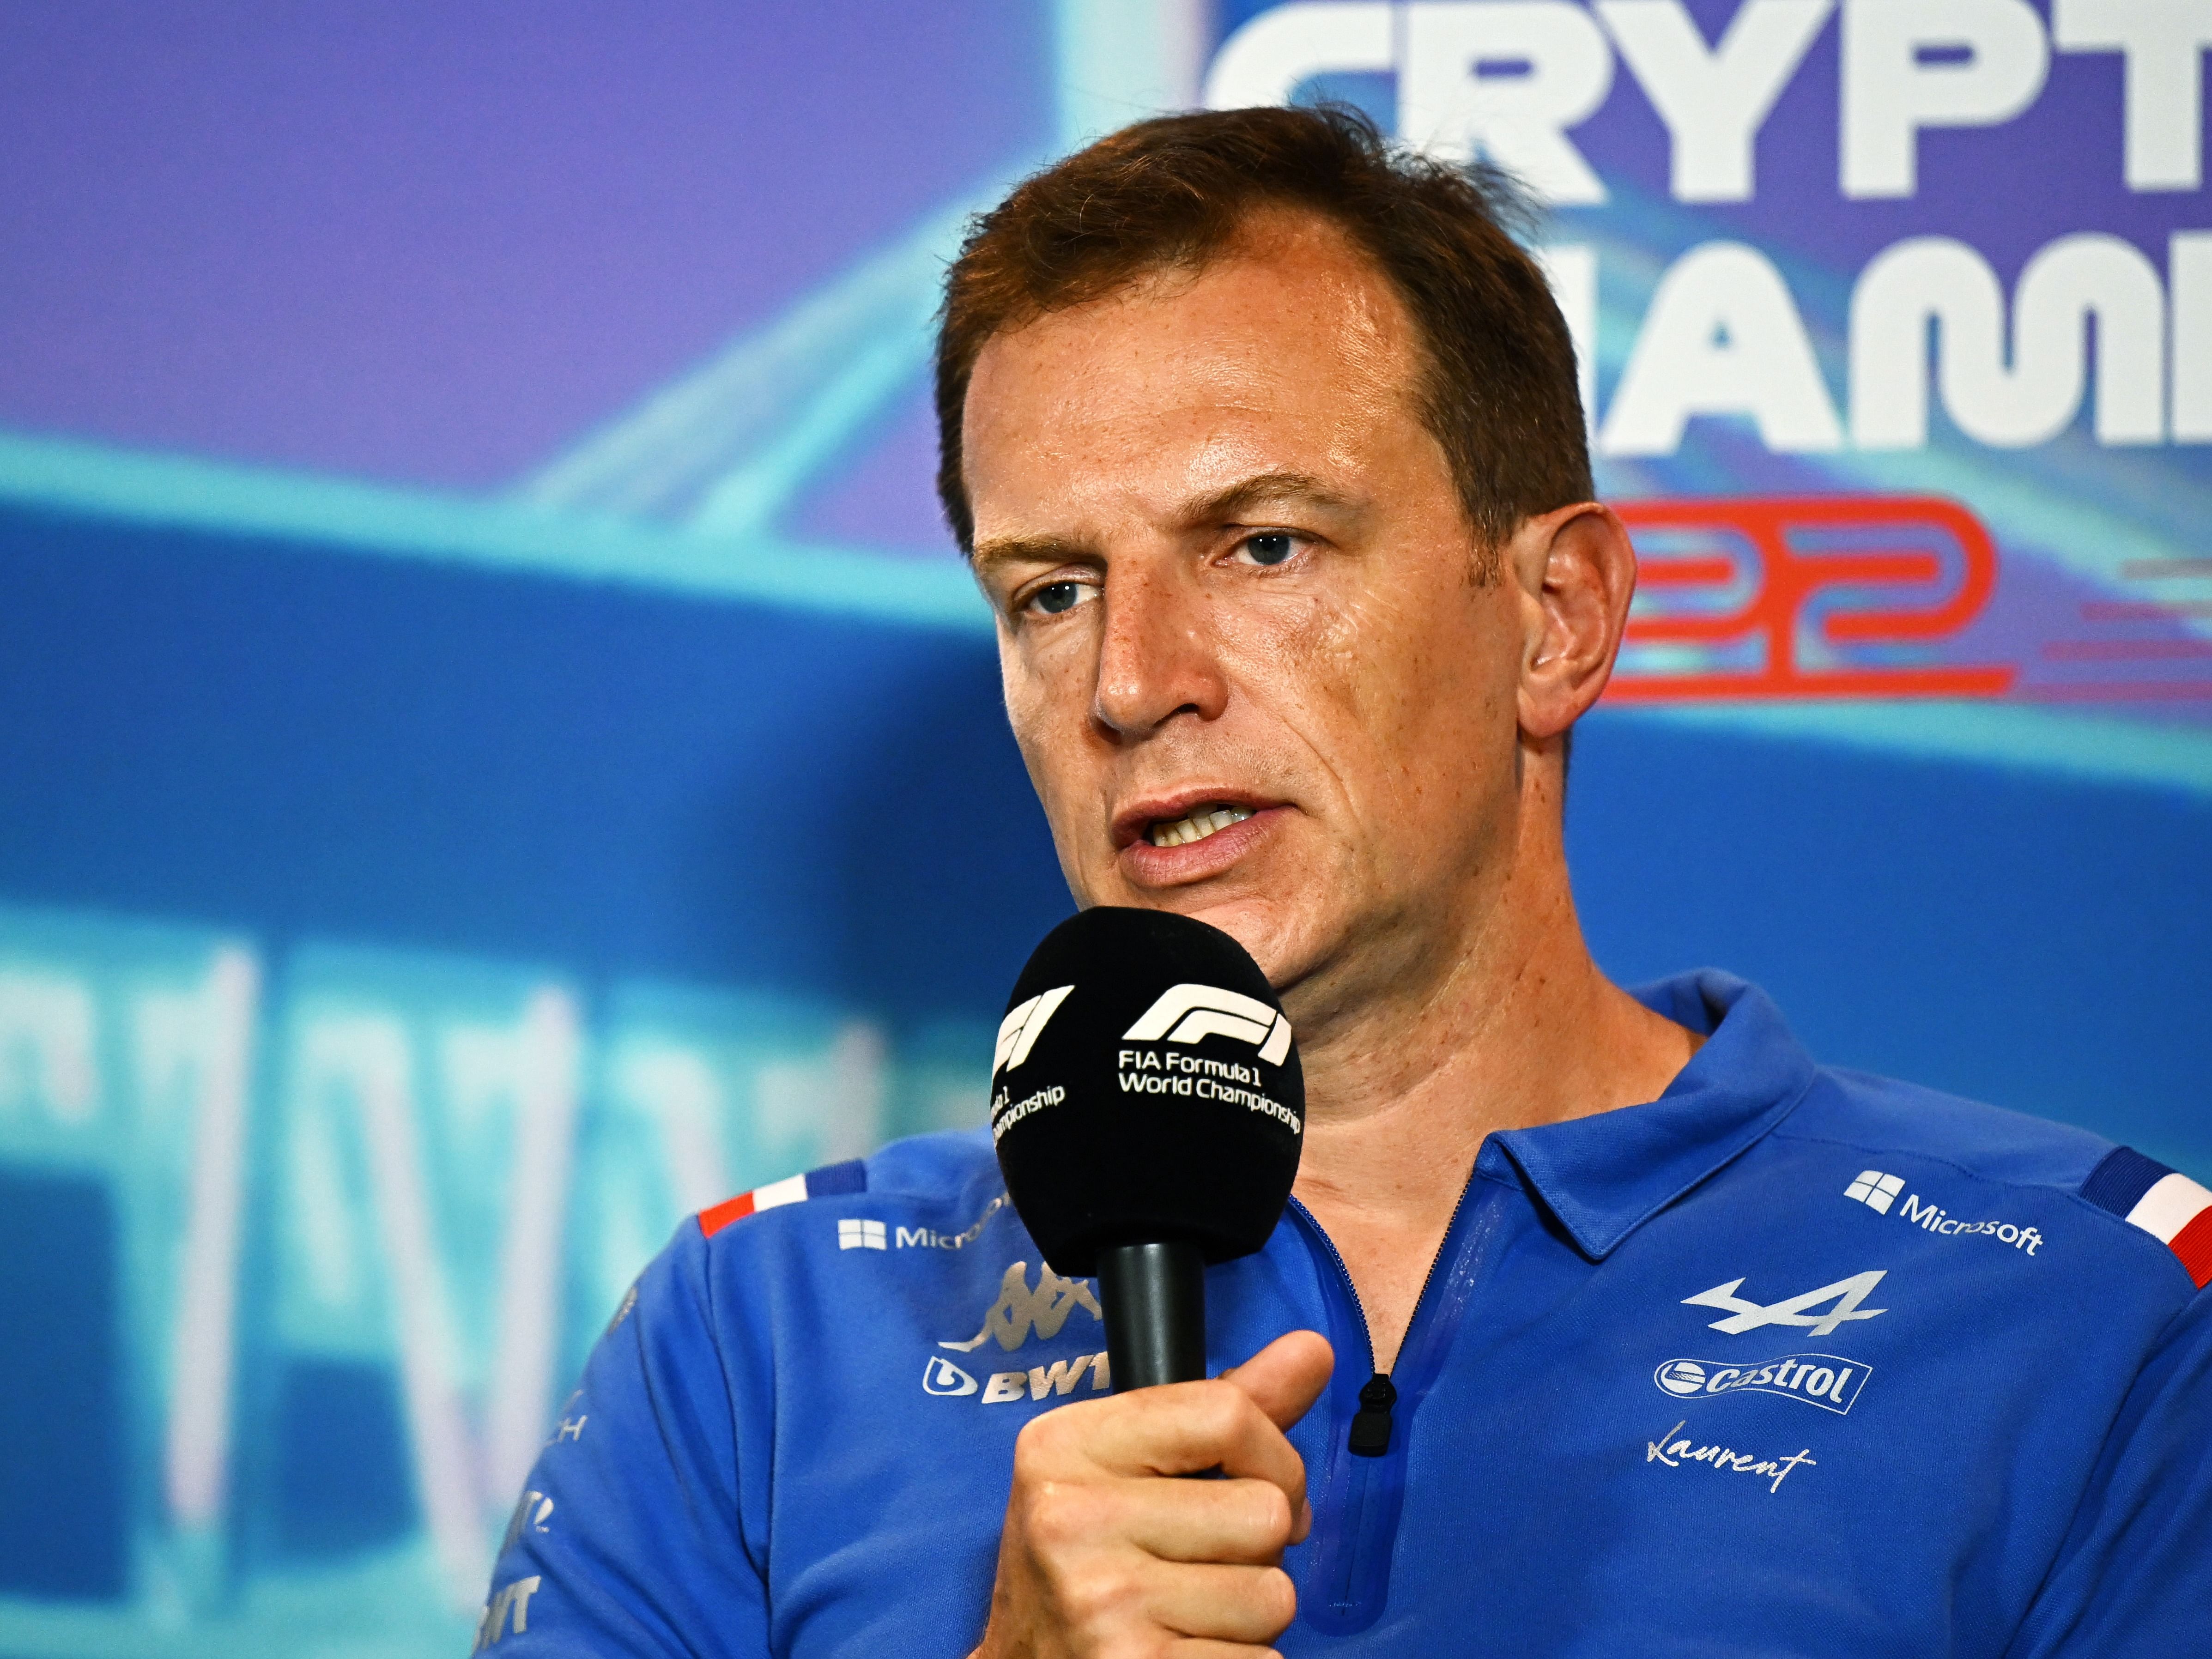 Laurent Rossi, CEO of Alpine F1 talks in the Team Principals Press Conference prior to final practice ahead of the 2022 F1 Miami Grand Prix. (Photo by Clive Mason/Getty Images)